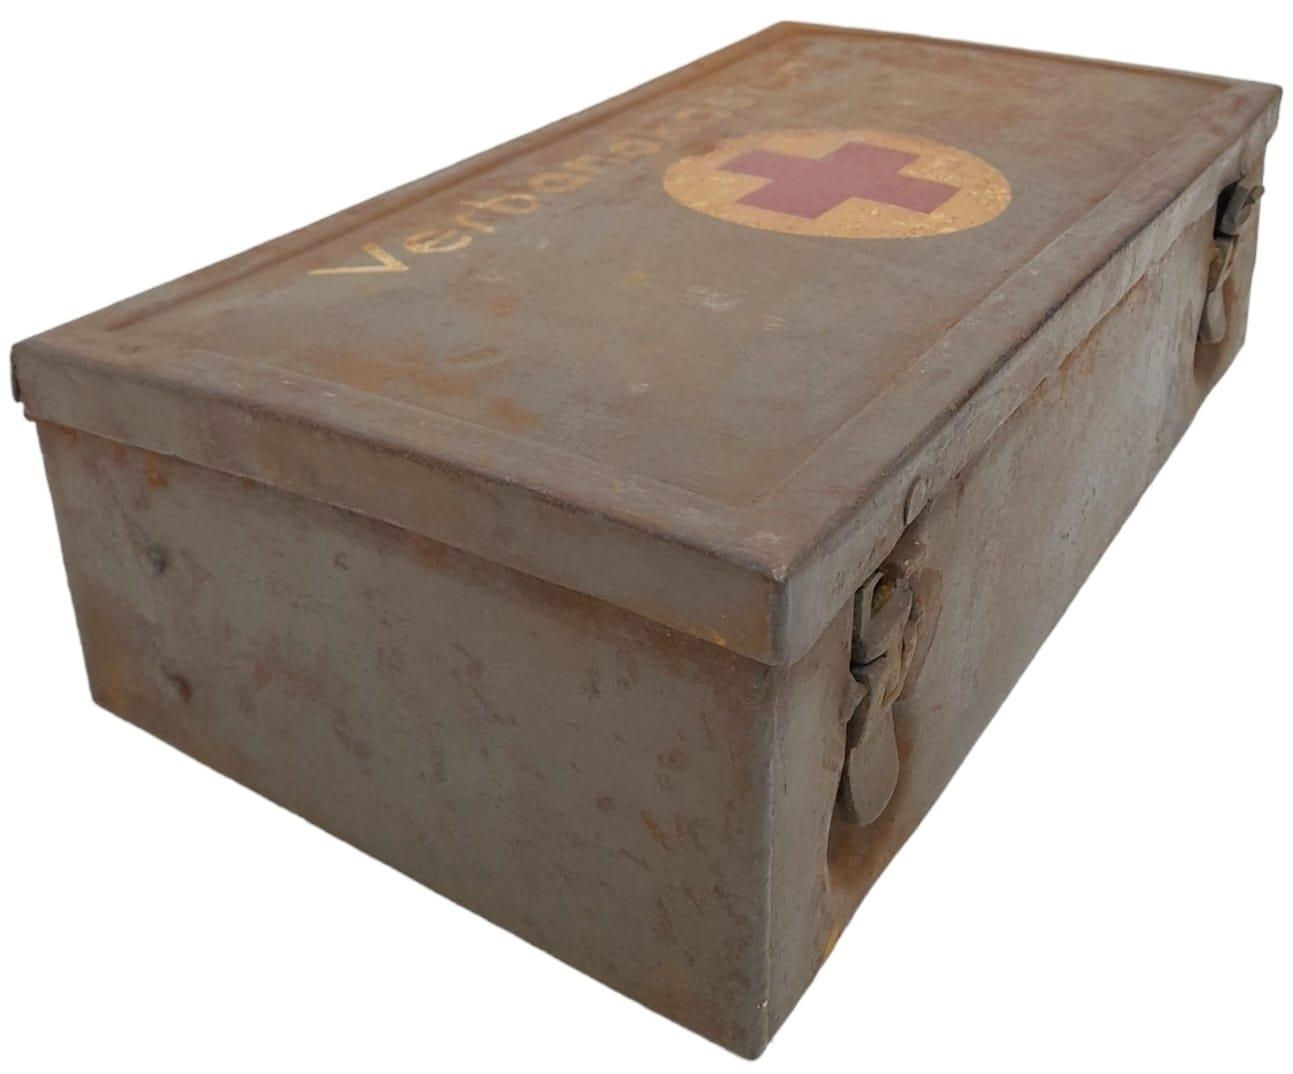 WW2 German Luftwaffe First Aid Tin with Contents. - Image 5 of 6